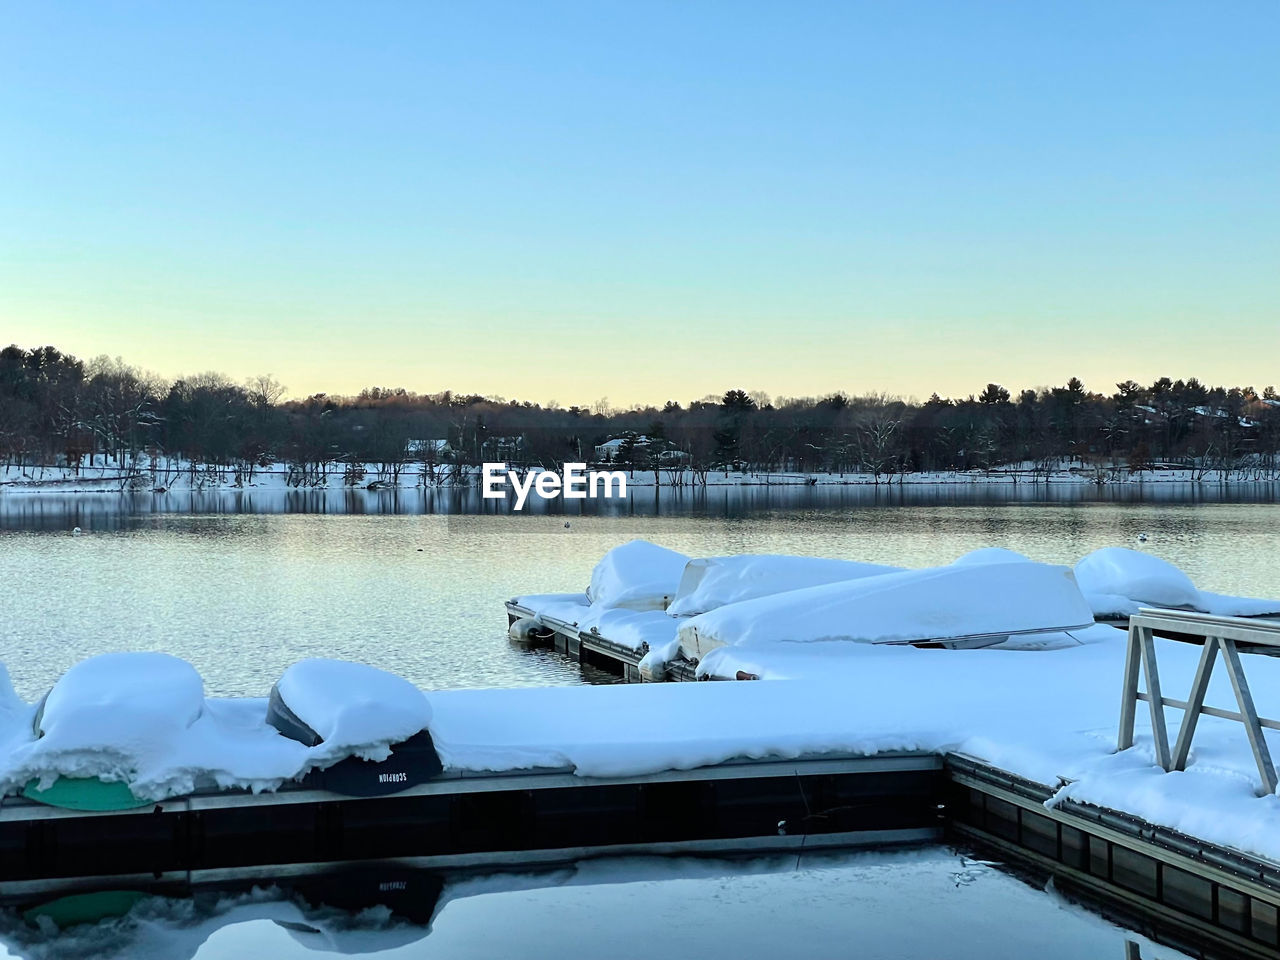 snow, water, cold temperature, winter, reflection, sky, nature, lake, frozen, tranquility, scenics - nature, no people, beauty in nature, tranquil scene, dock, clear sky, vehicle, blue, tree, ice, day, environment, travel destinations, copy space, non-urban scene, outdoors, boat, transportation, travel